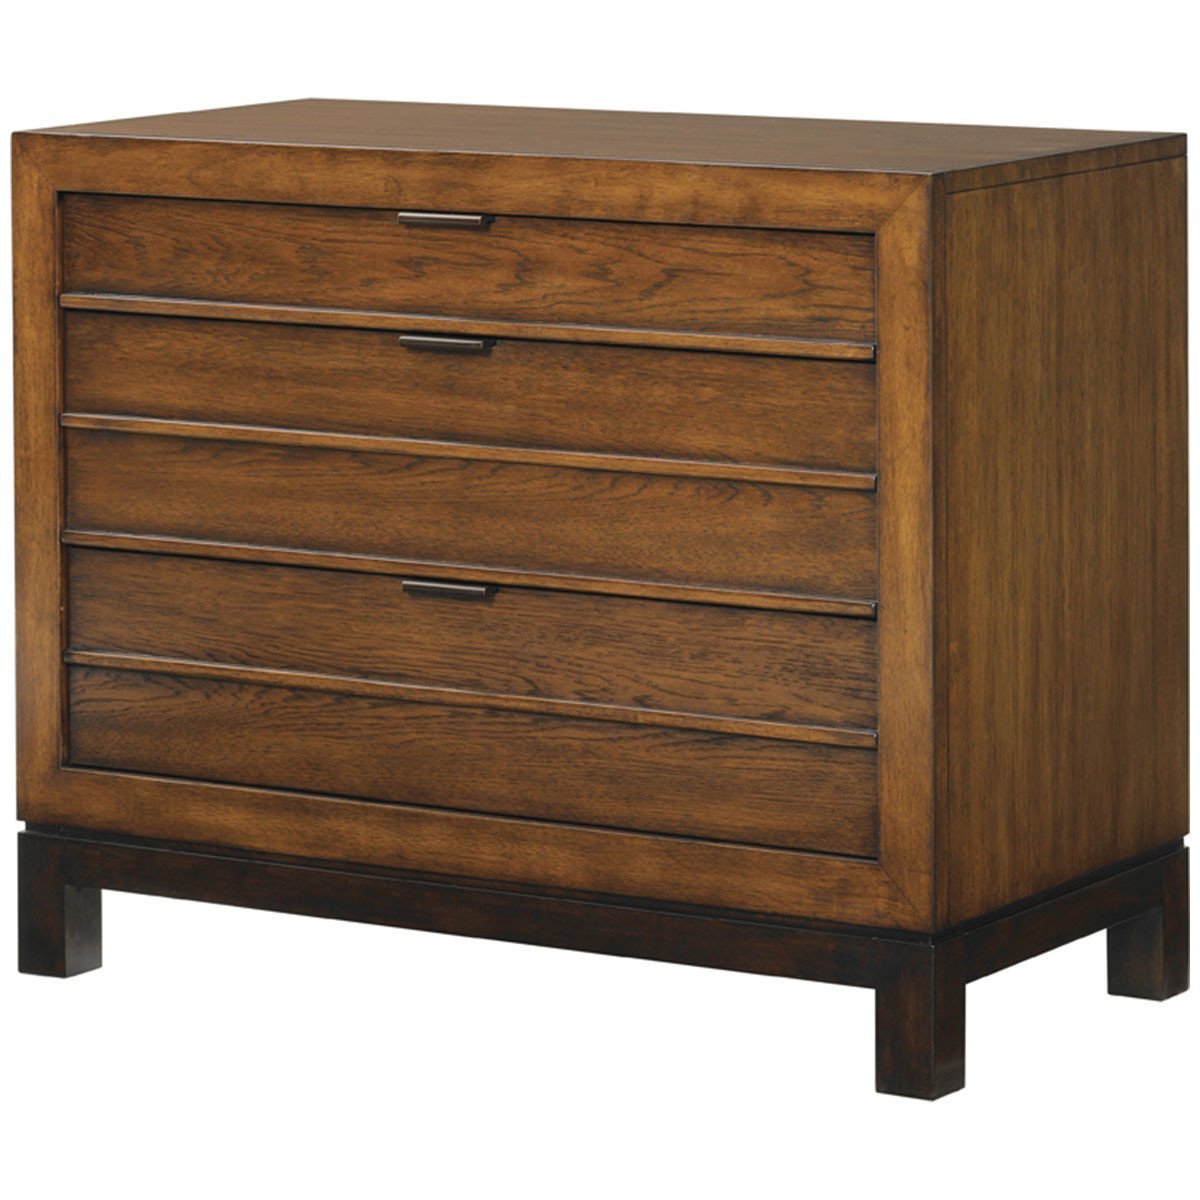 Tommy Bahama Ocean Club Coral Night Stand 536-621